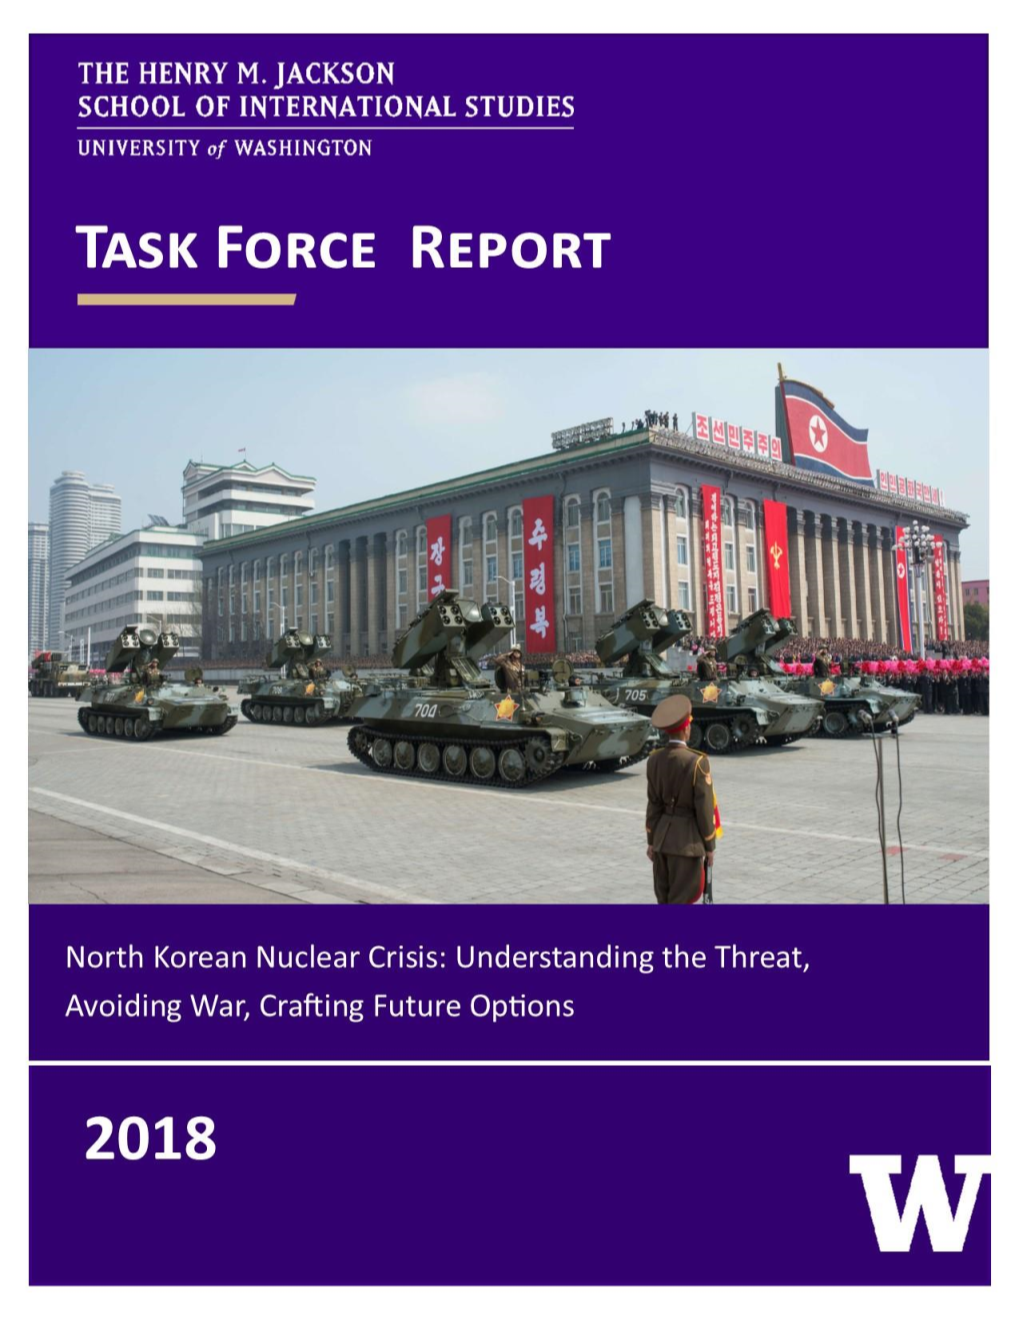 Download the Task Force Report (PDF)